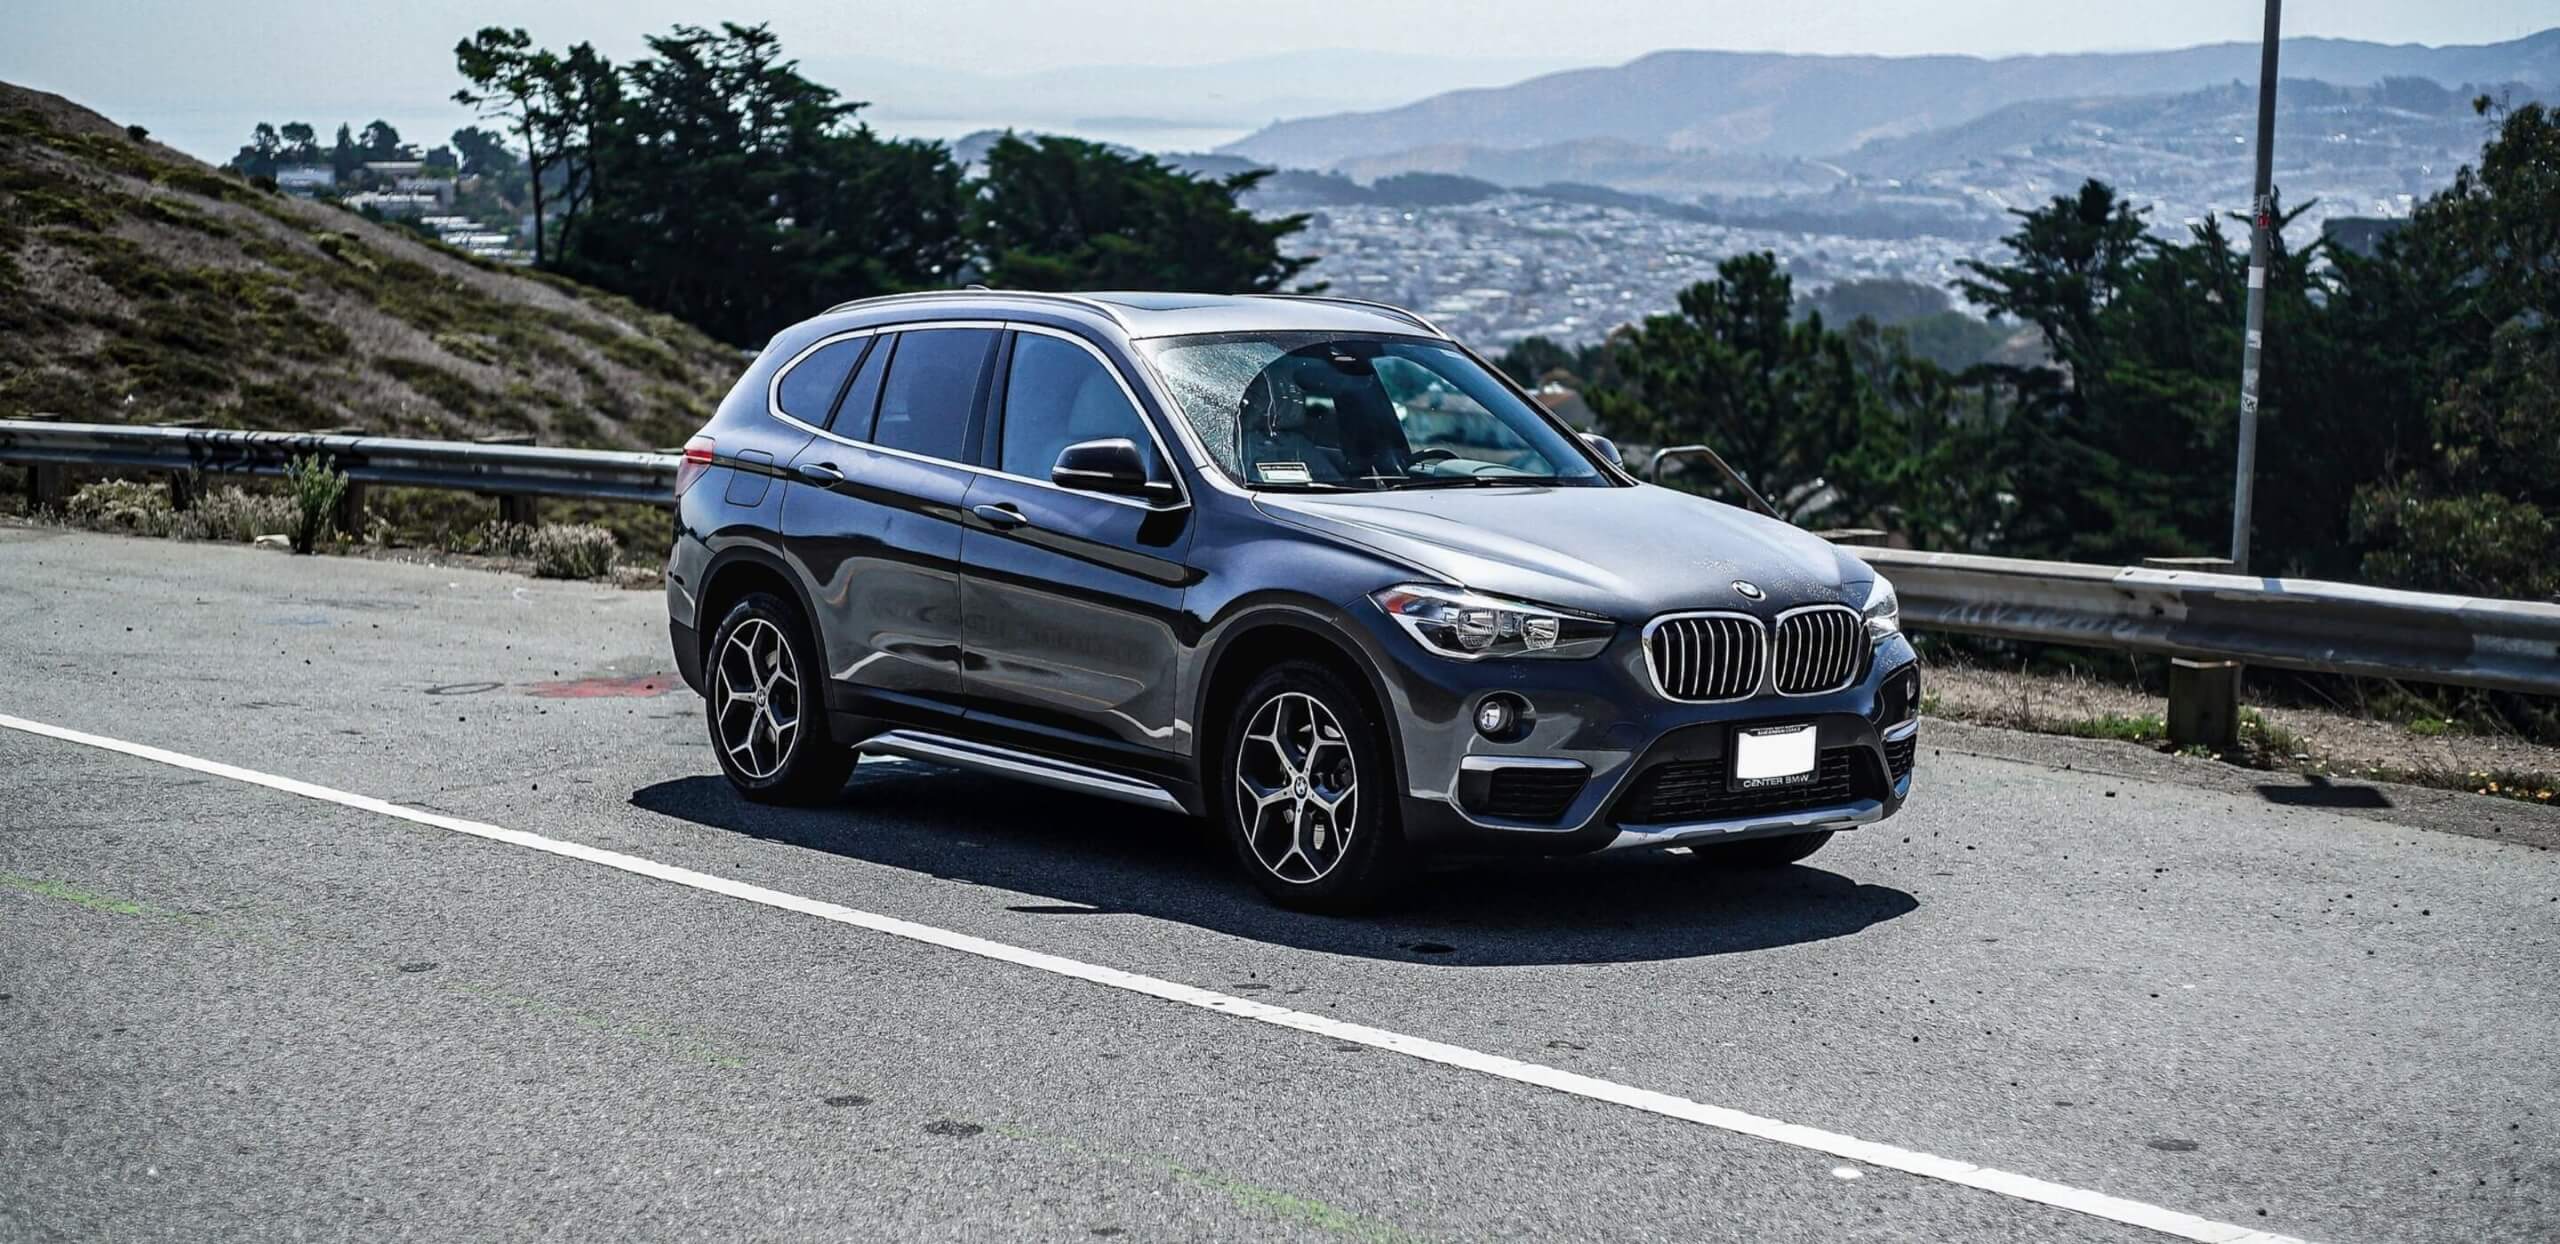 2019-bmw-x1-silver-featured-image